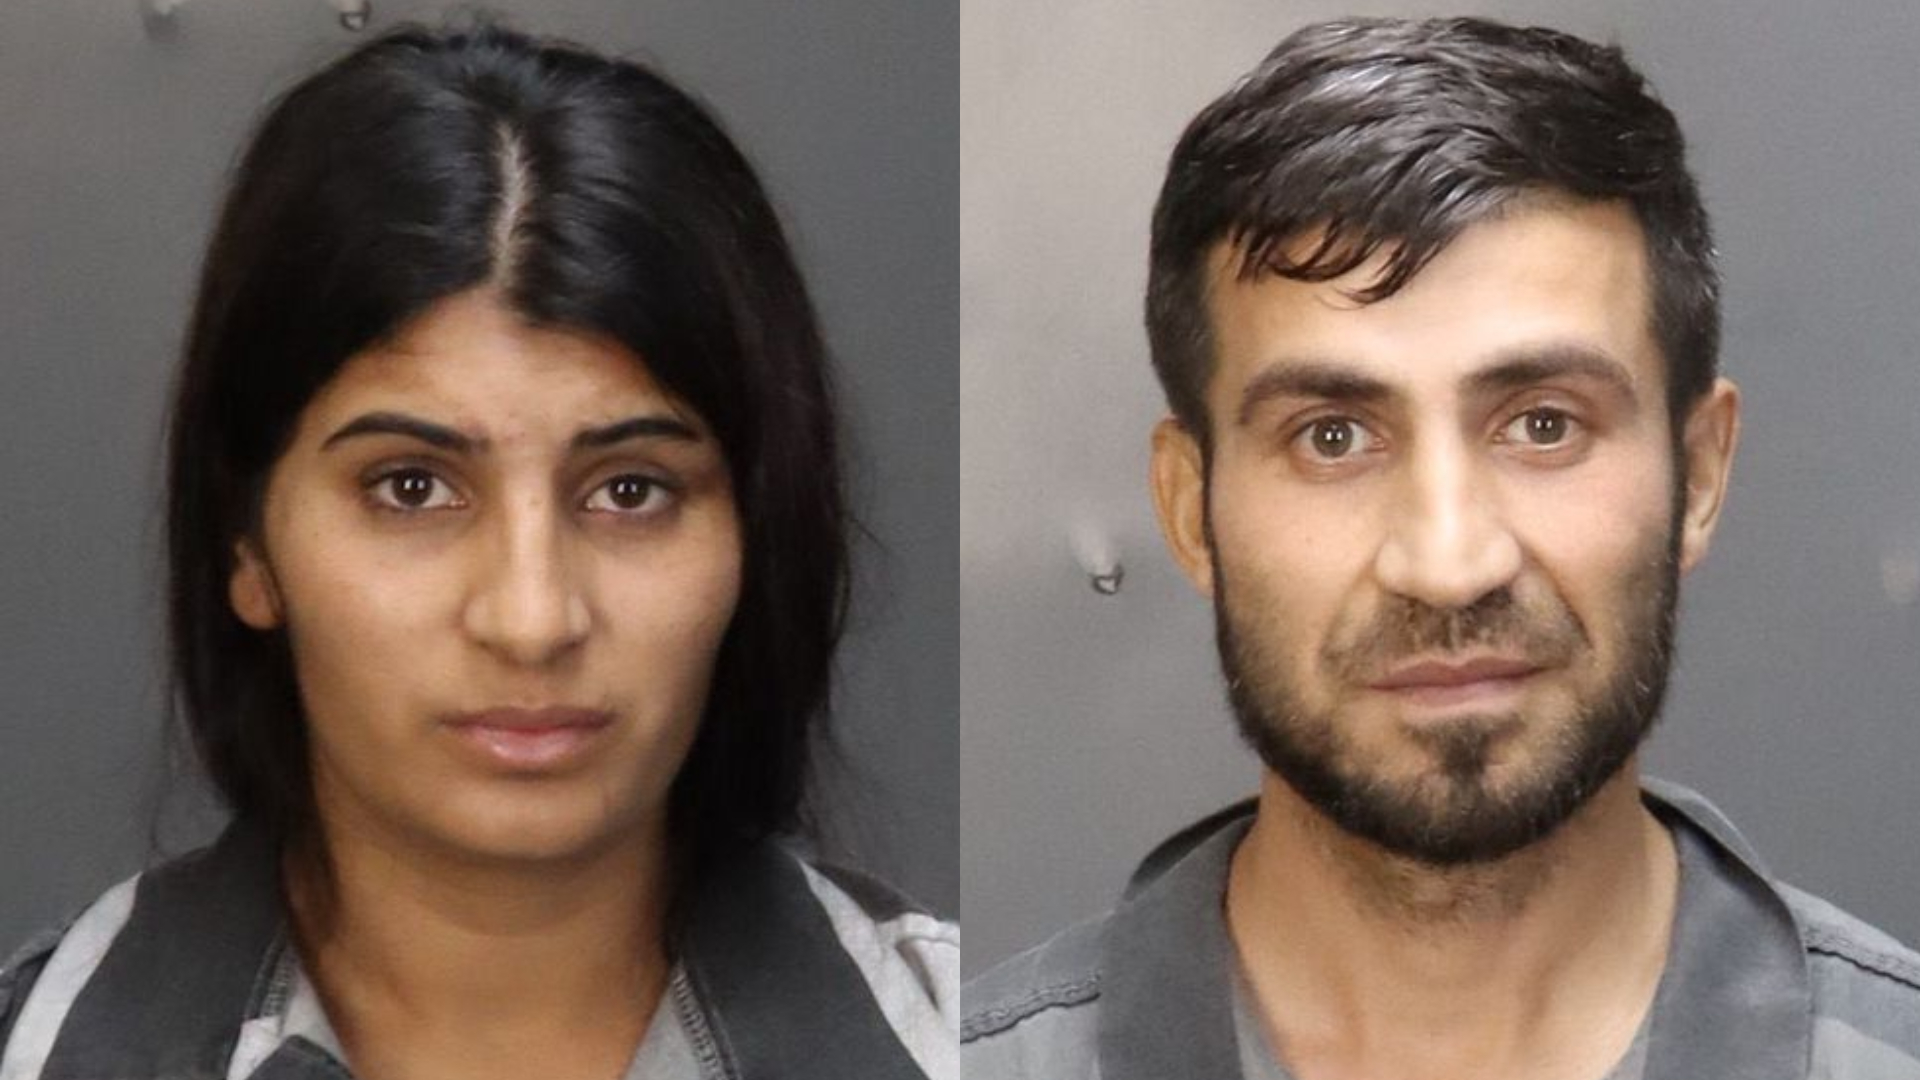 in cosmetics Waco Couple from of area accused H-E-B thousands while children car in leaving behind stealing stores